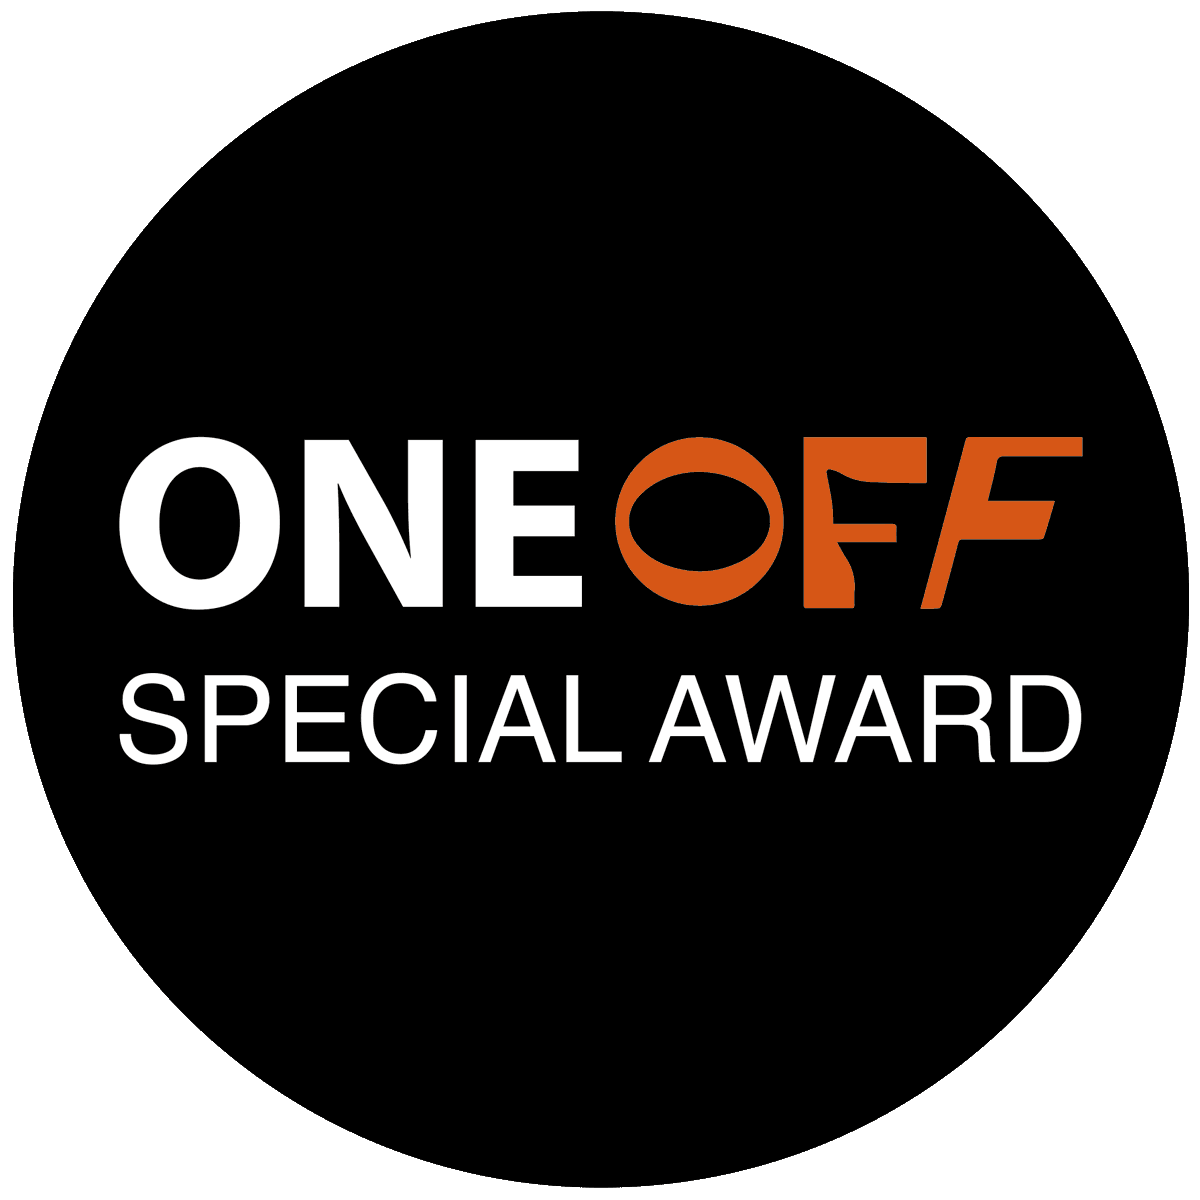 Announcing 1 of 6 #OneOff Special Awards for 2023 in advance of #Offies Awards Ceremony on 25 Feb 24. This one to 20 Stories High @20StoriesHigh who are at the leading edge of consideration of wellbeing and self-care within the theatre industry, not only for audiences, but for…